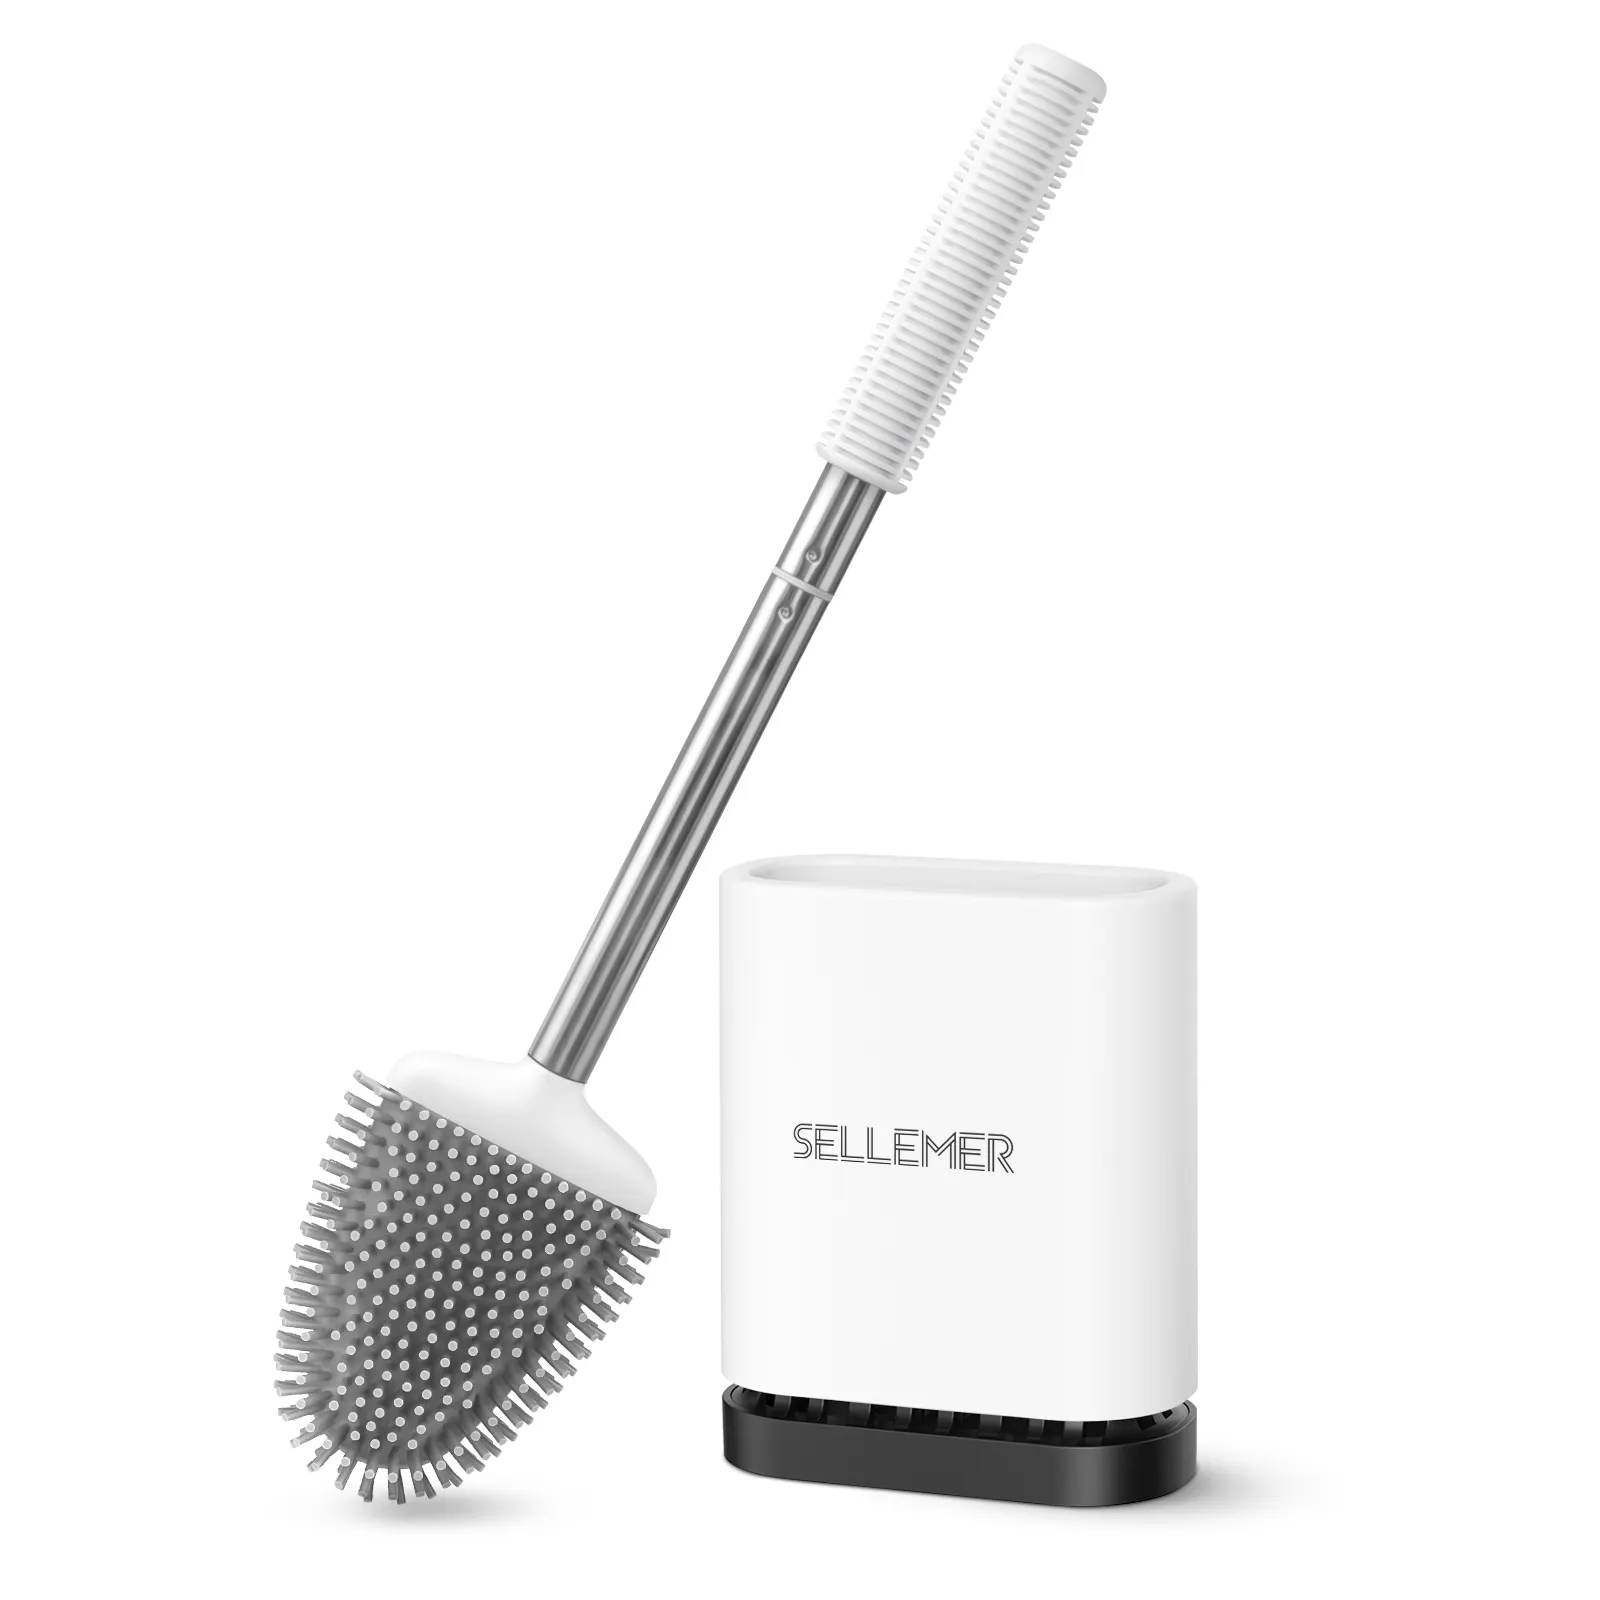 Sellemer Toilet Brush and Holder Set for Bathroom Toilet Bowl Brush Head with Silicone Bristles and Stainless Steel Handle